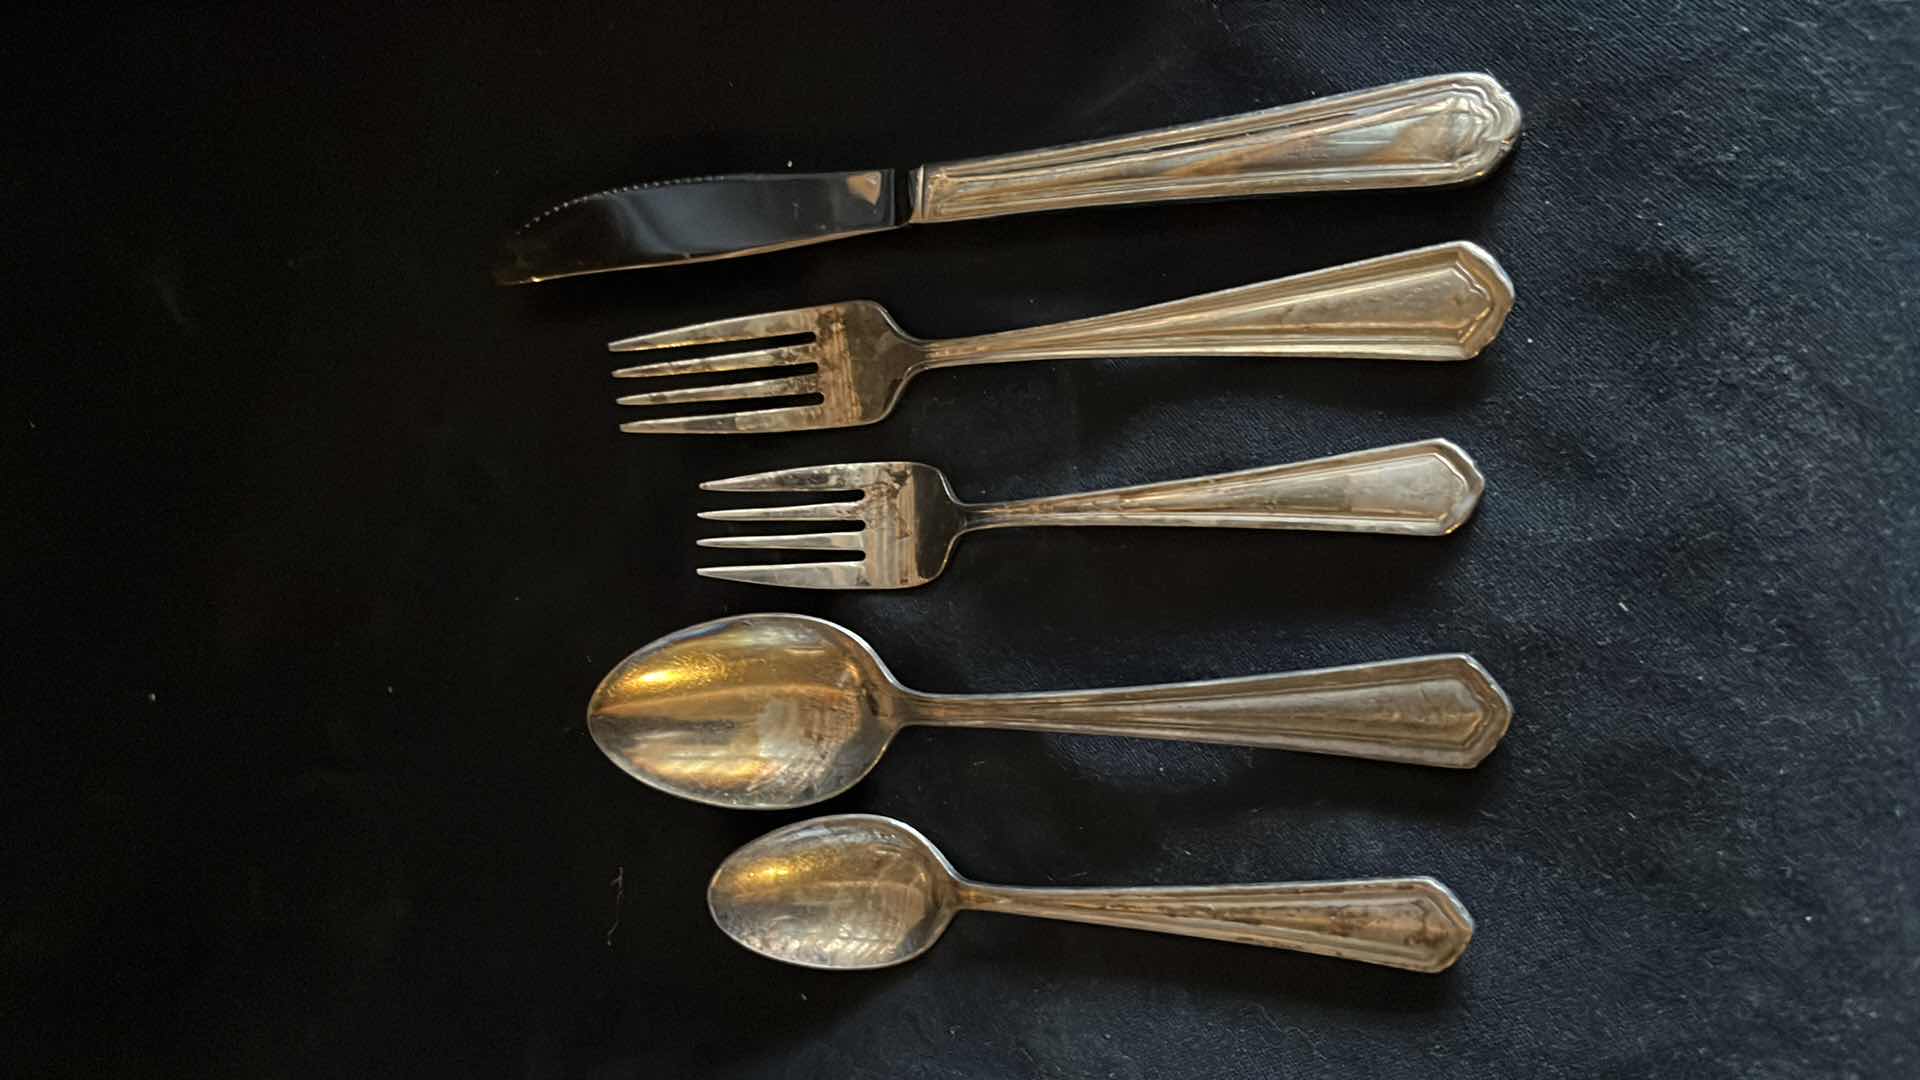 Photo 1 of FLATWARE VARIOUS STYLES, BUTTER KNIFE, SMALL SPOON, SERVING SPOON, SALAD FORK, SMALL FORK 20 EACH (100 TOTAL)